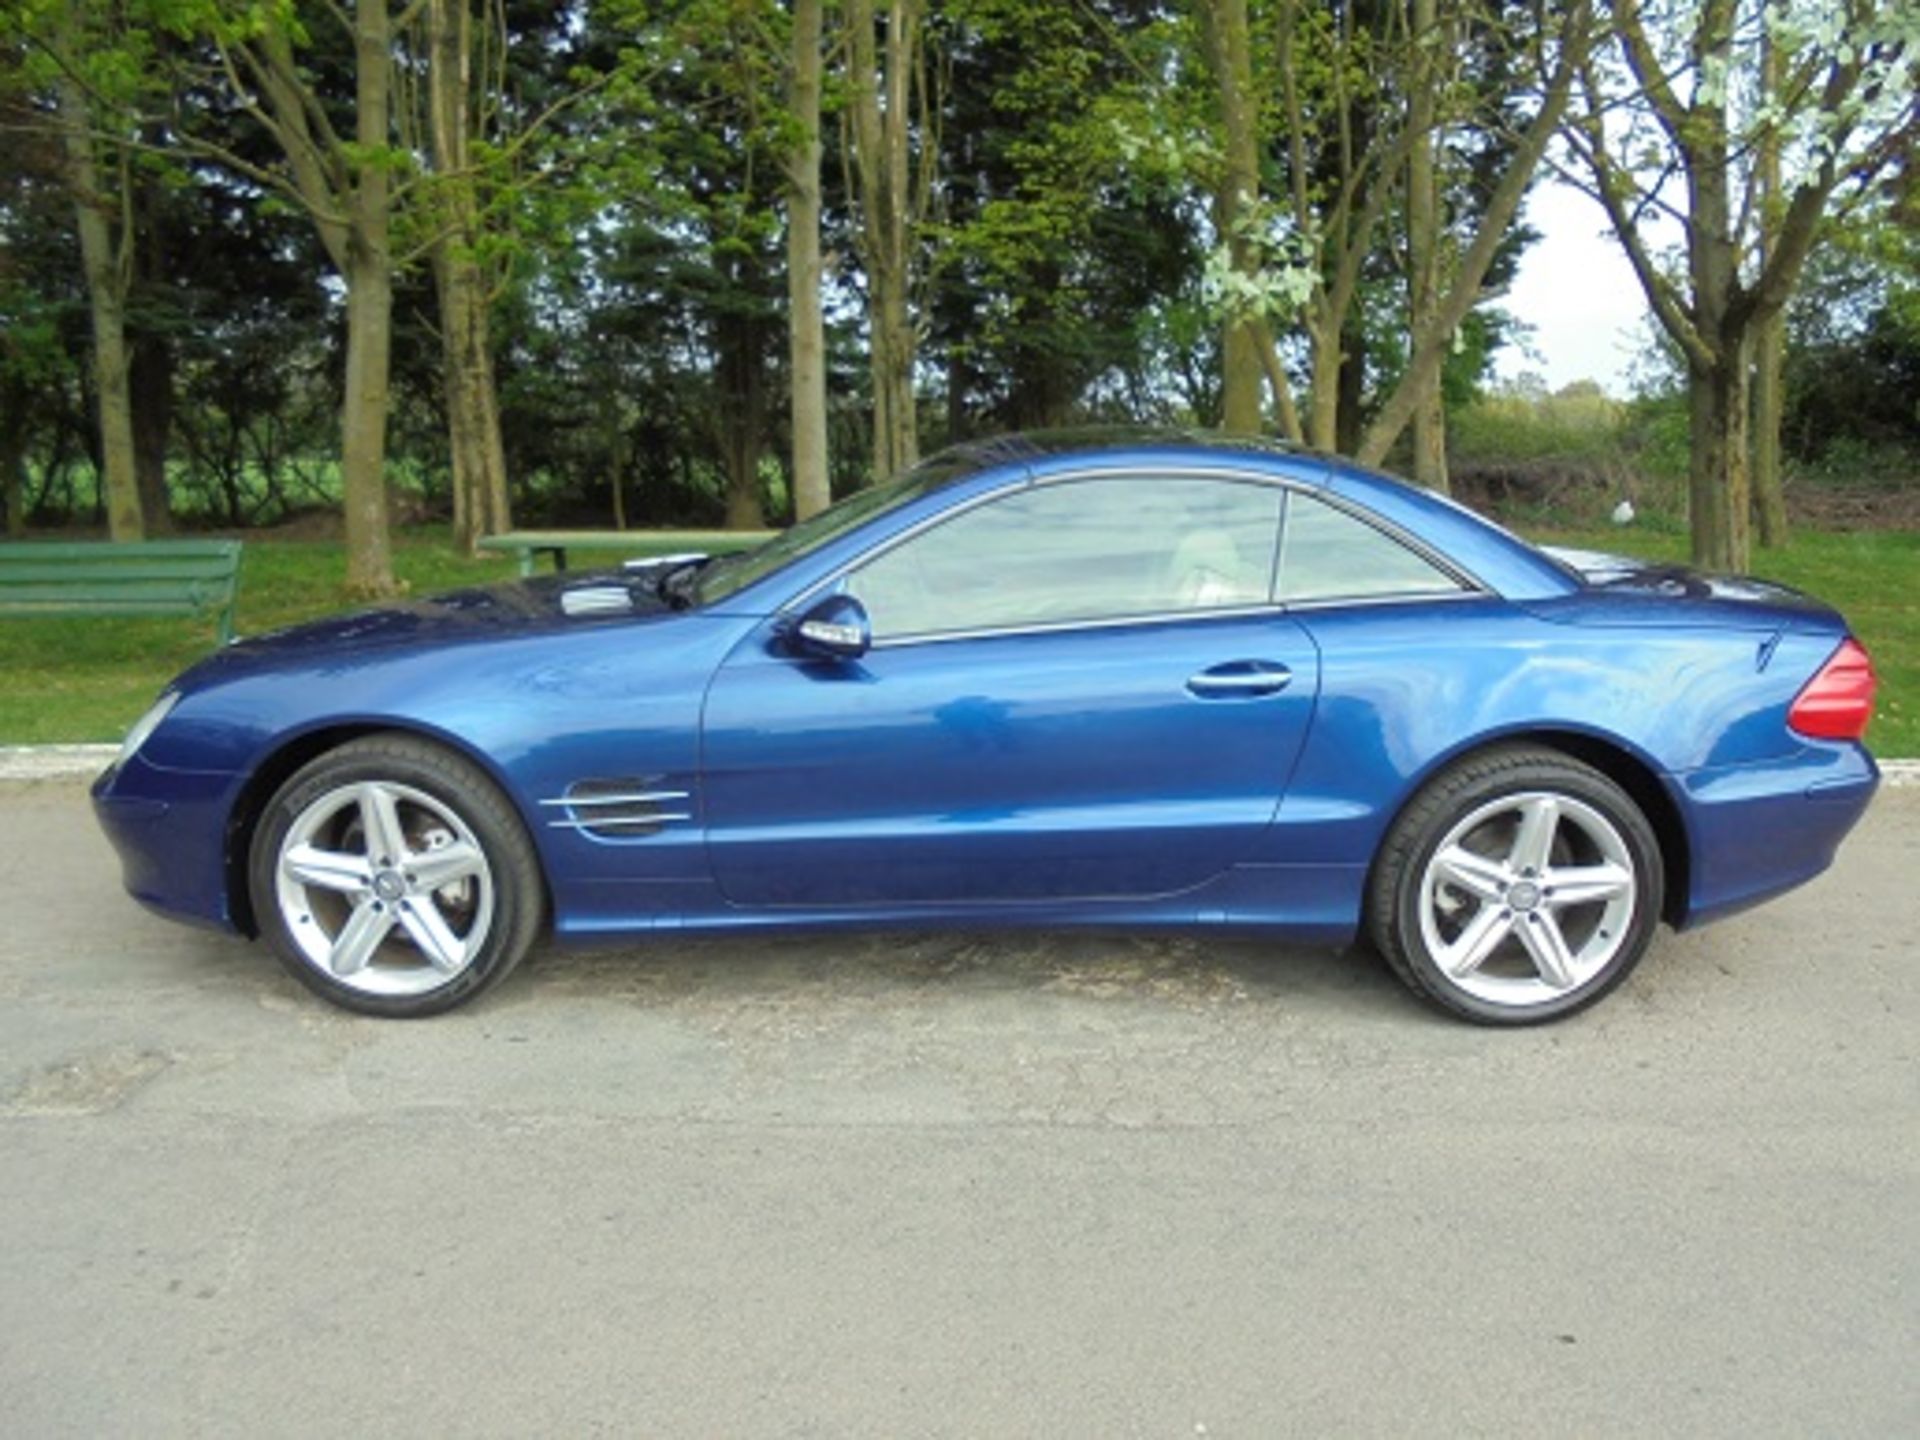 MERCEDES SL350 CONVERTIBLE WITH PRIVATE PLATE: L1OBY INCLUDED - Image 7 of 12